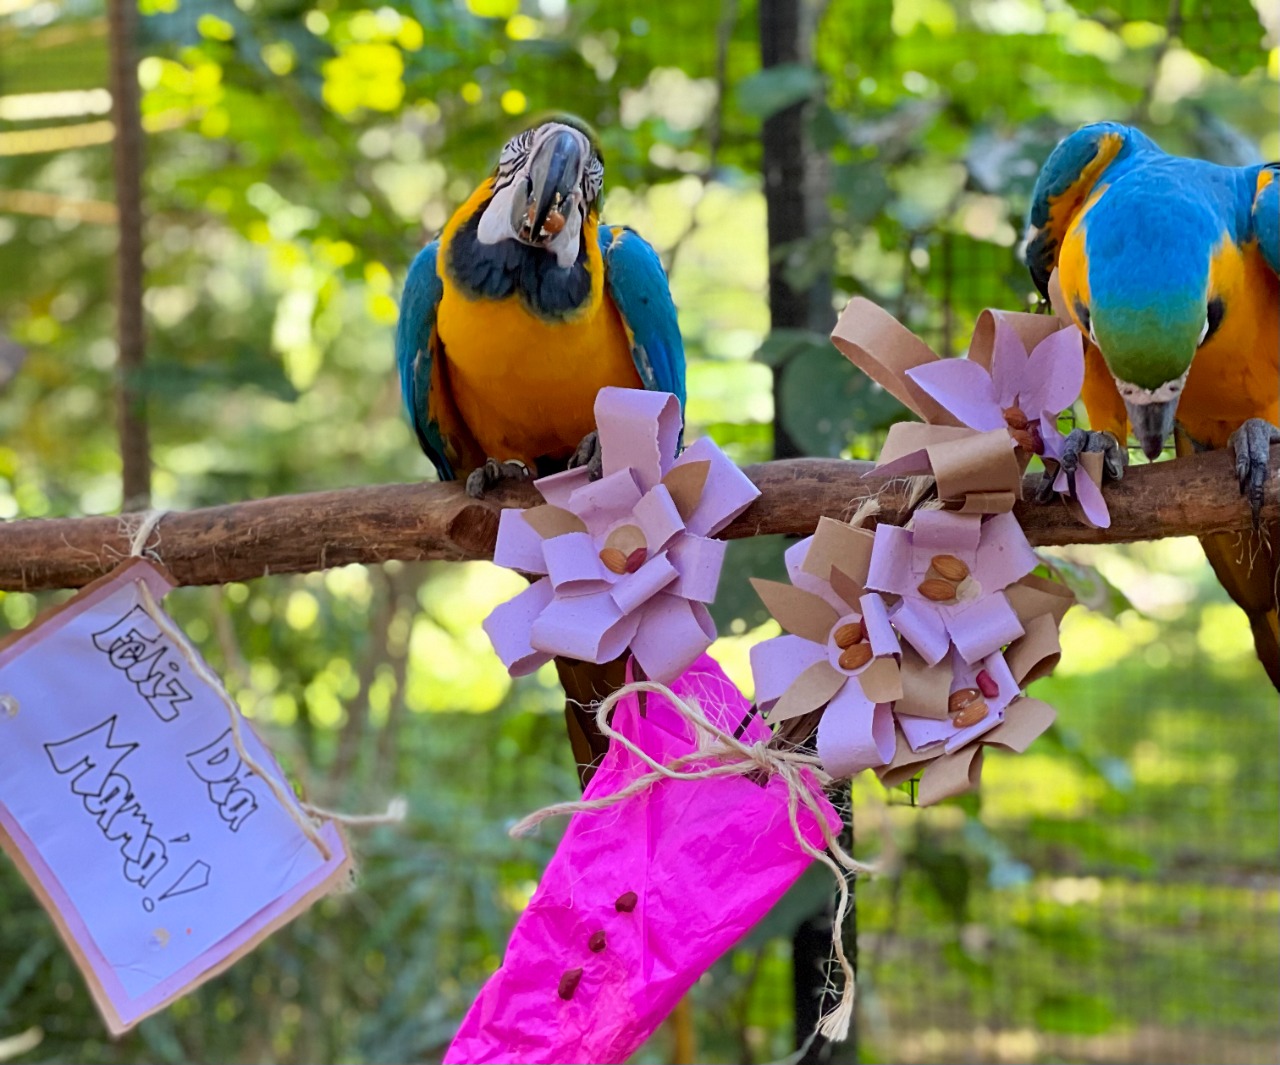 Animals from the ITAIPU Environmental Center savored a banquet for national celebrations